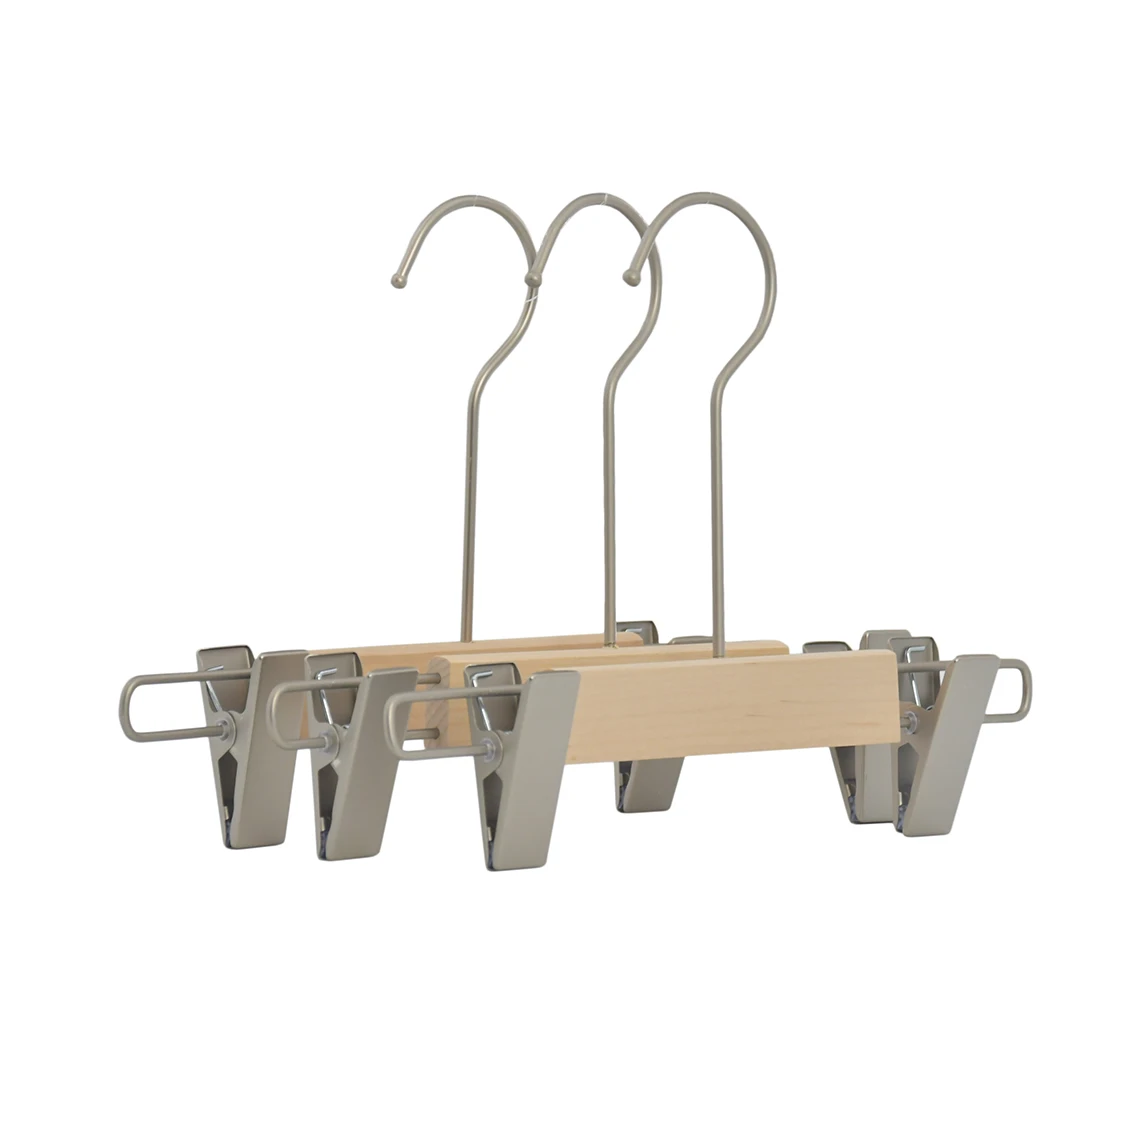 Hot selling amazing kids pants hanger without paint for trousers